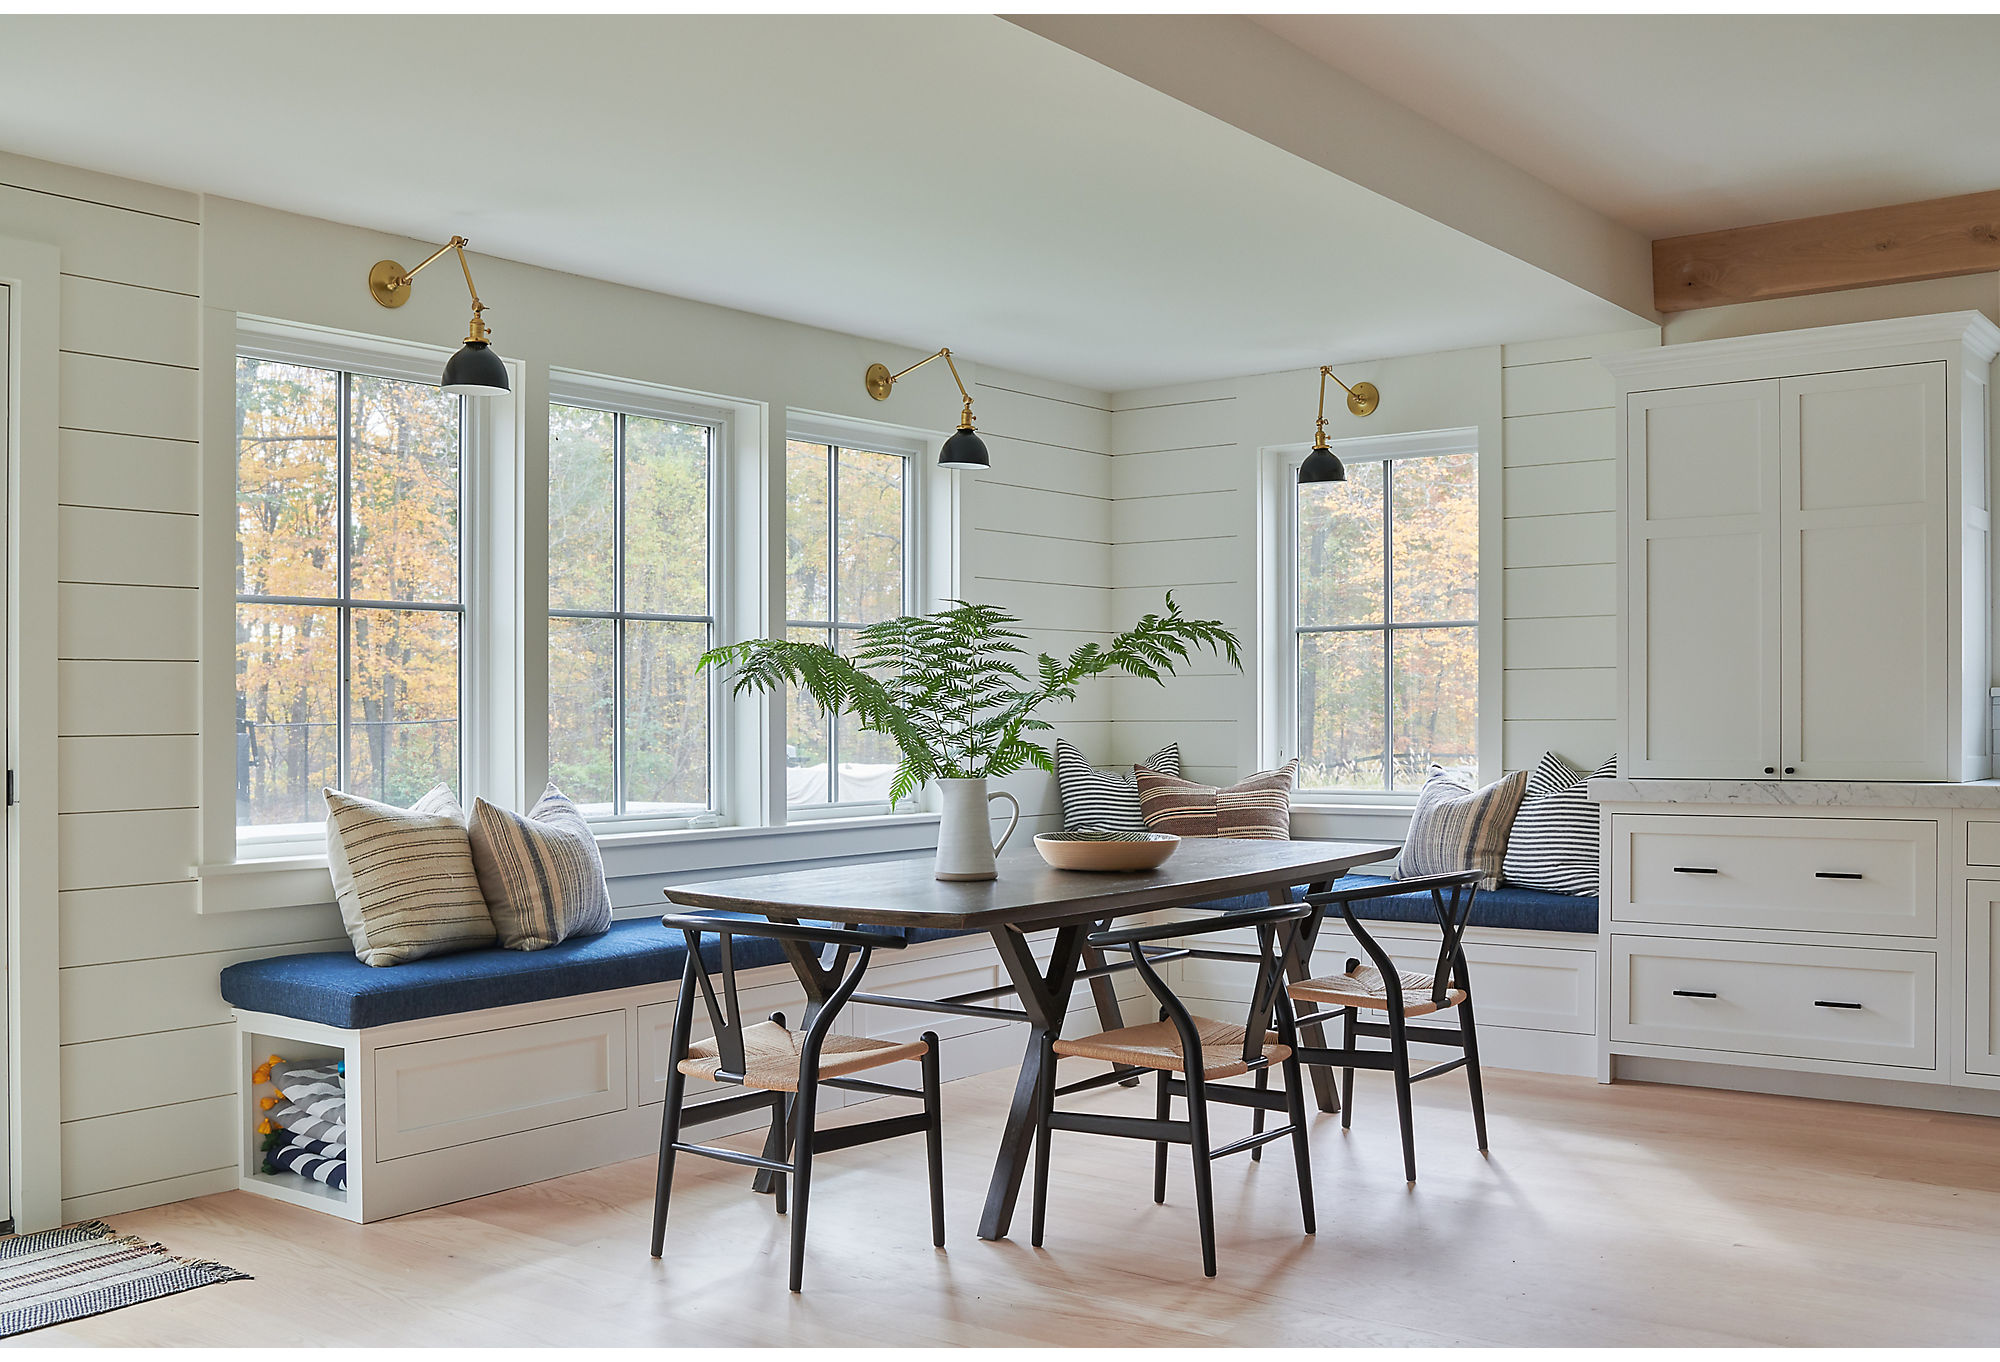 Even though the home included popular nods to modern farmhouse, like the shiplap paneling in the dining area, Kelly kept things fresh by pairing them with unexpected elements such as vintage textiles. Find similar chairs here.
